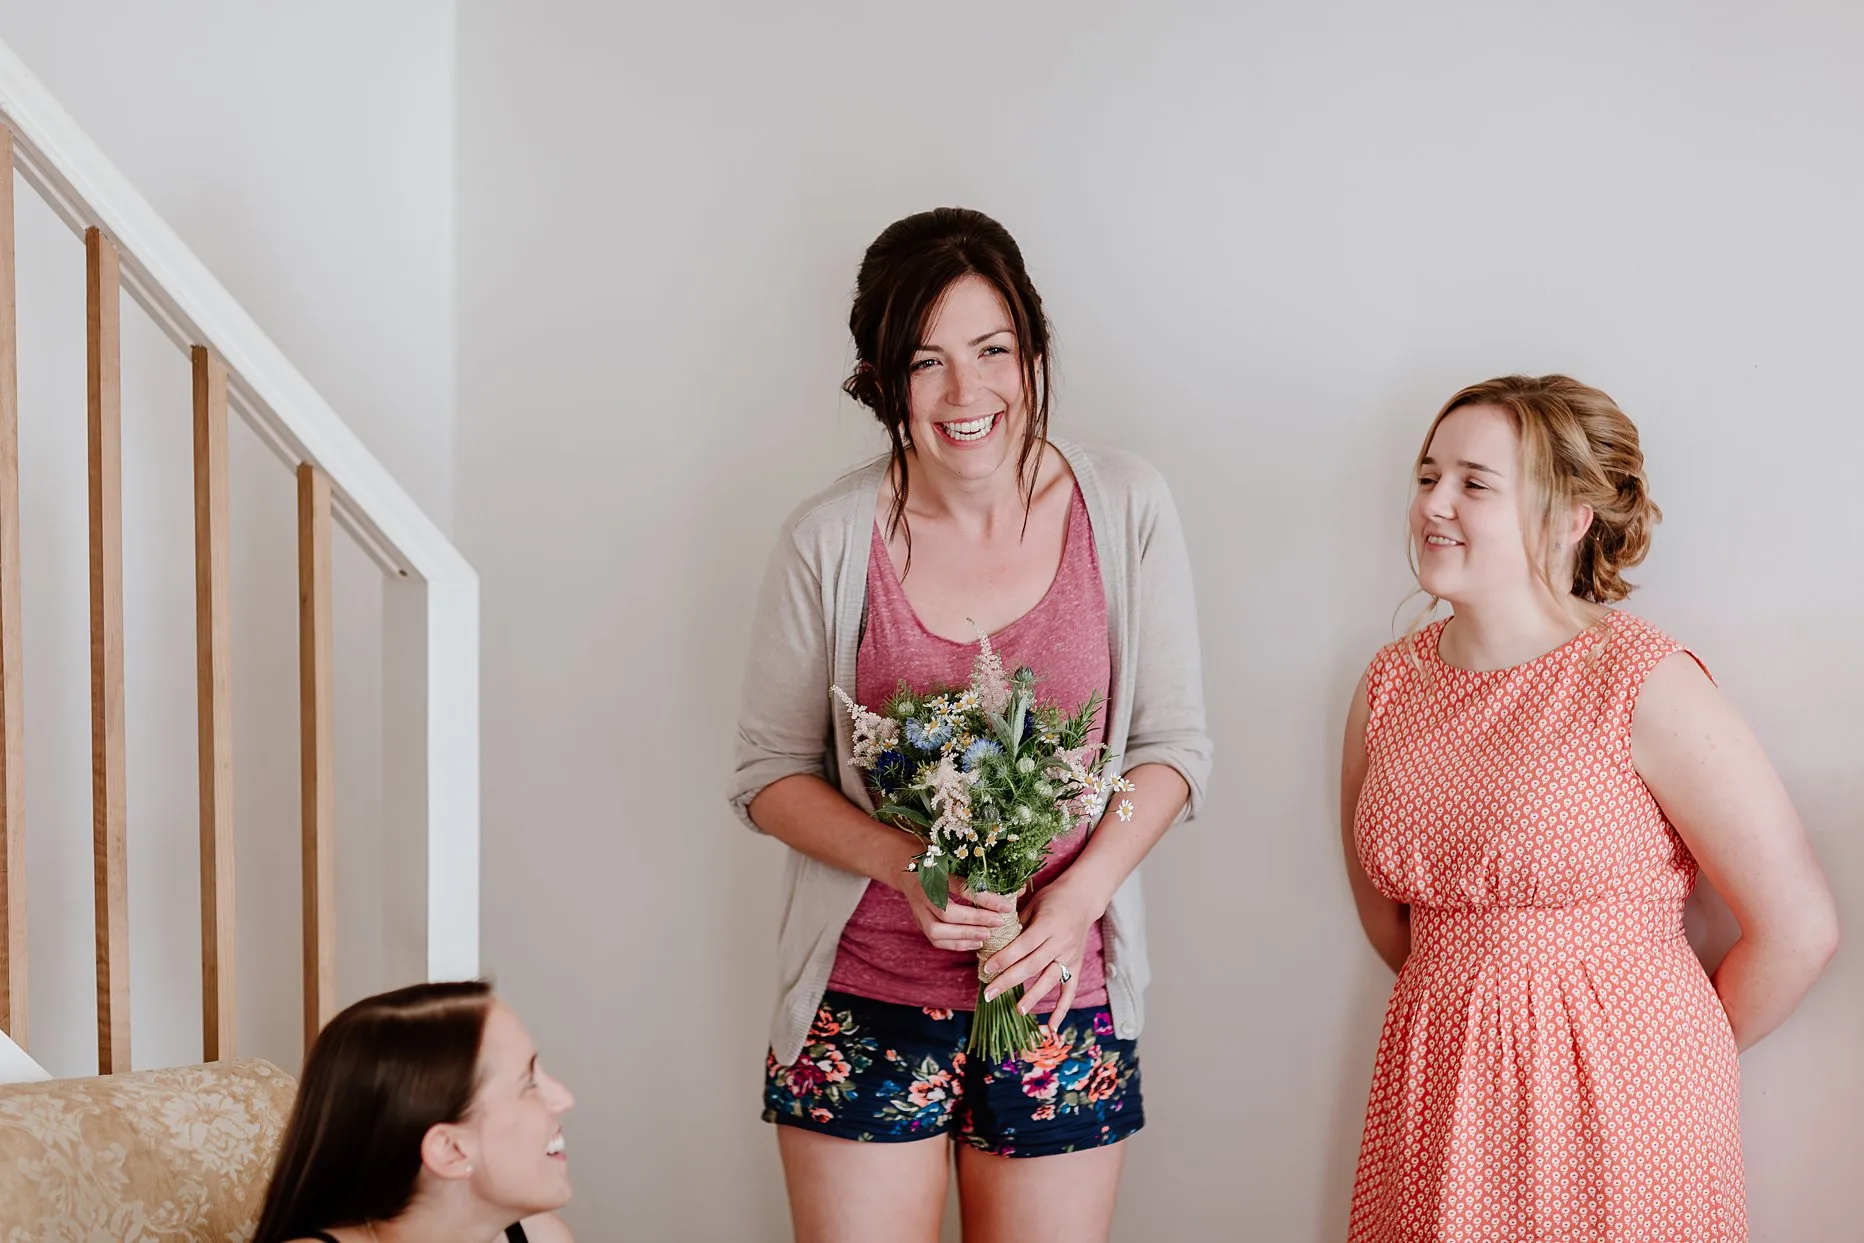 Bride holding wedding bouquet and smiling. Her bridesmaids are stood next to her all dressed in casual clothing. 